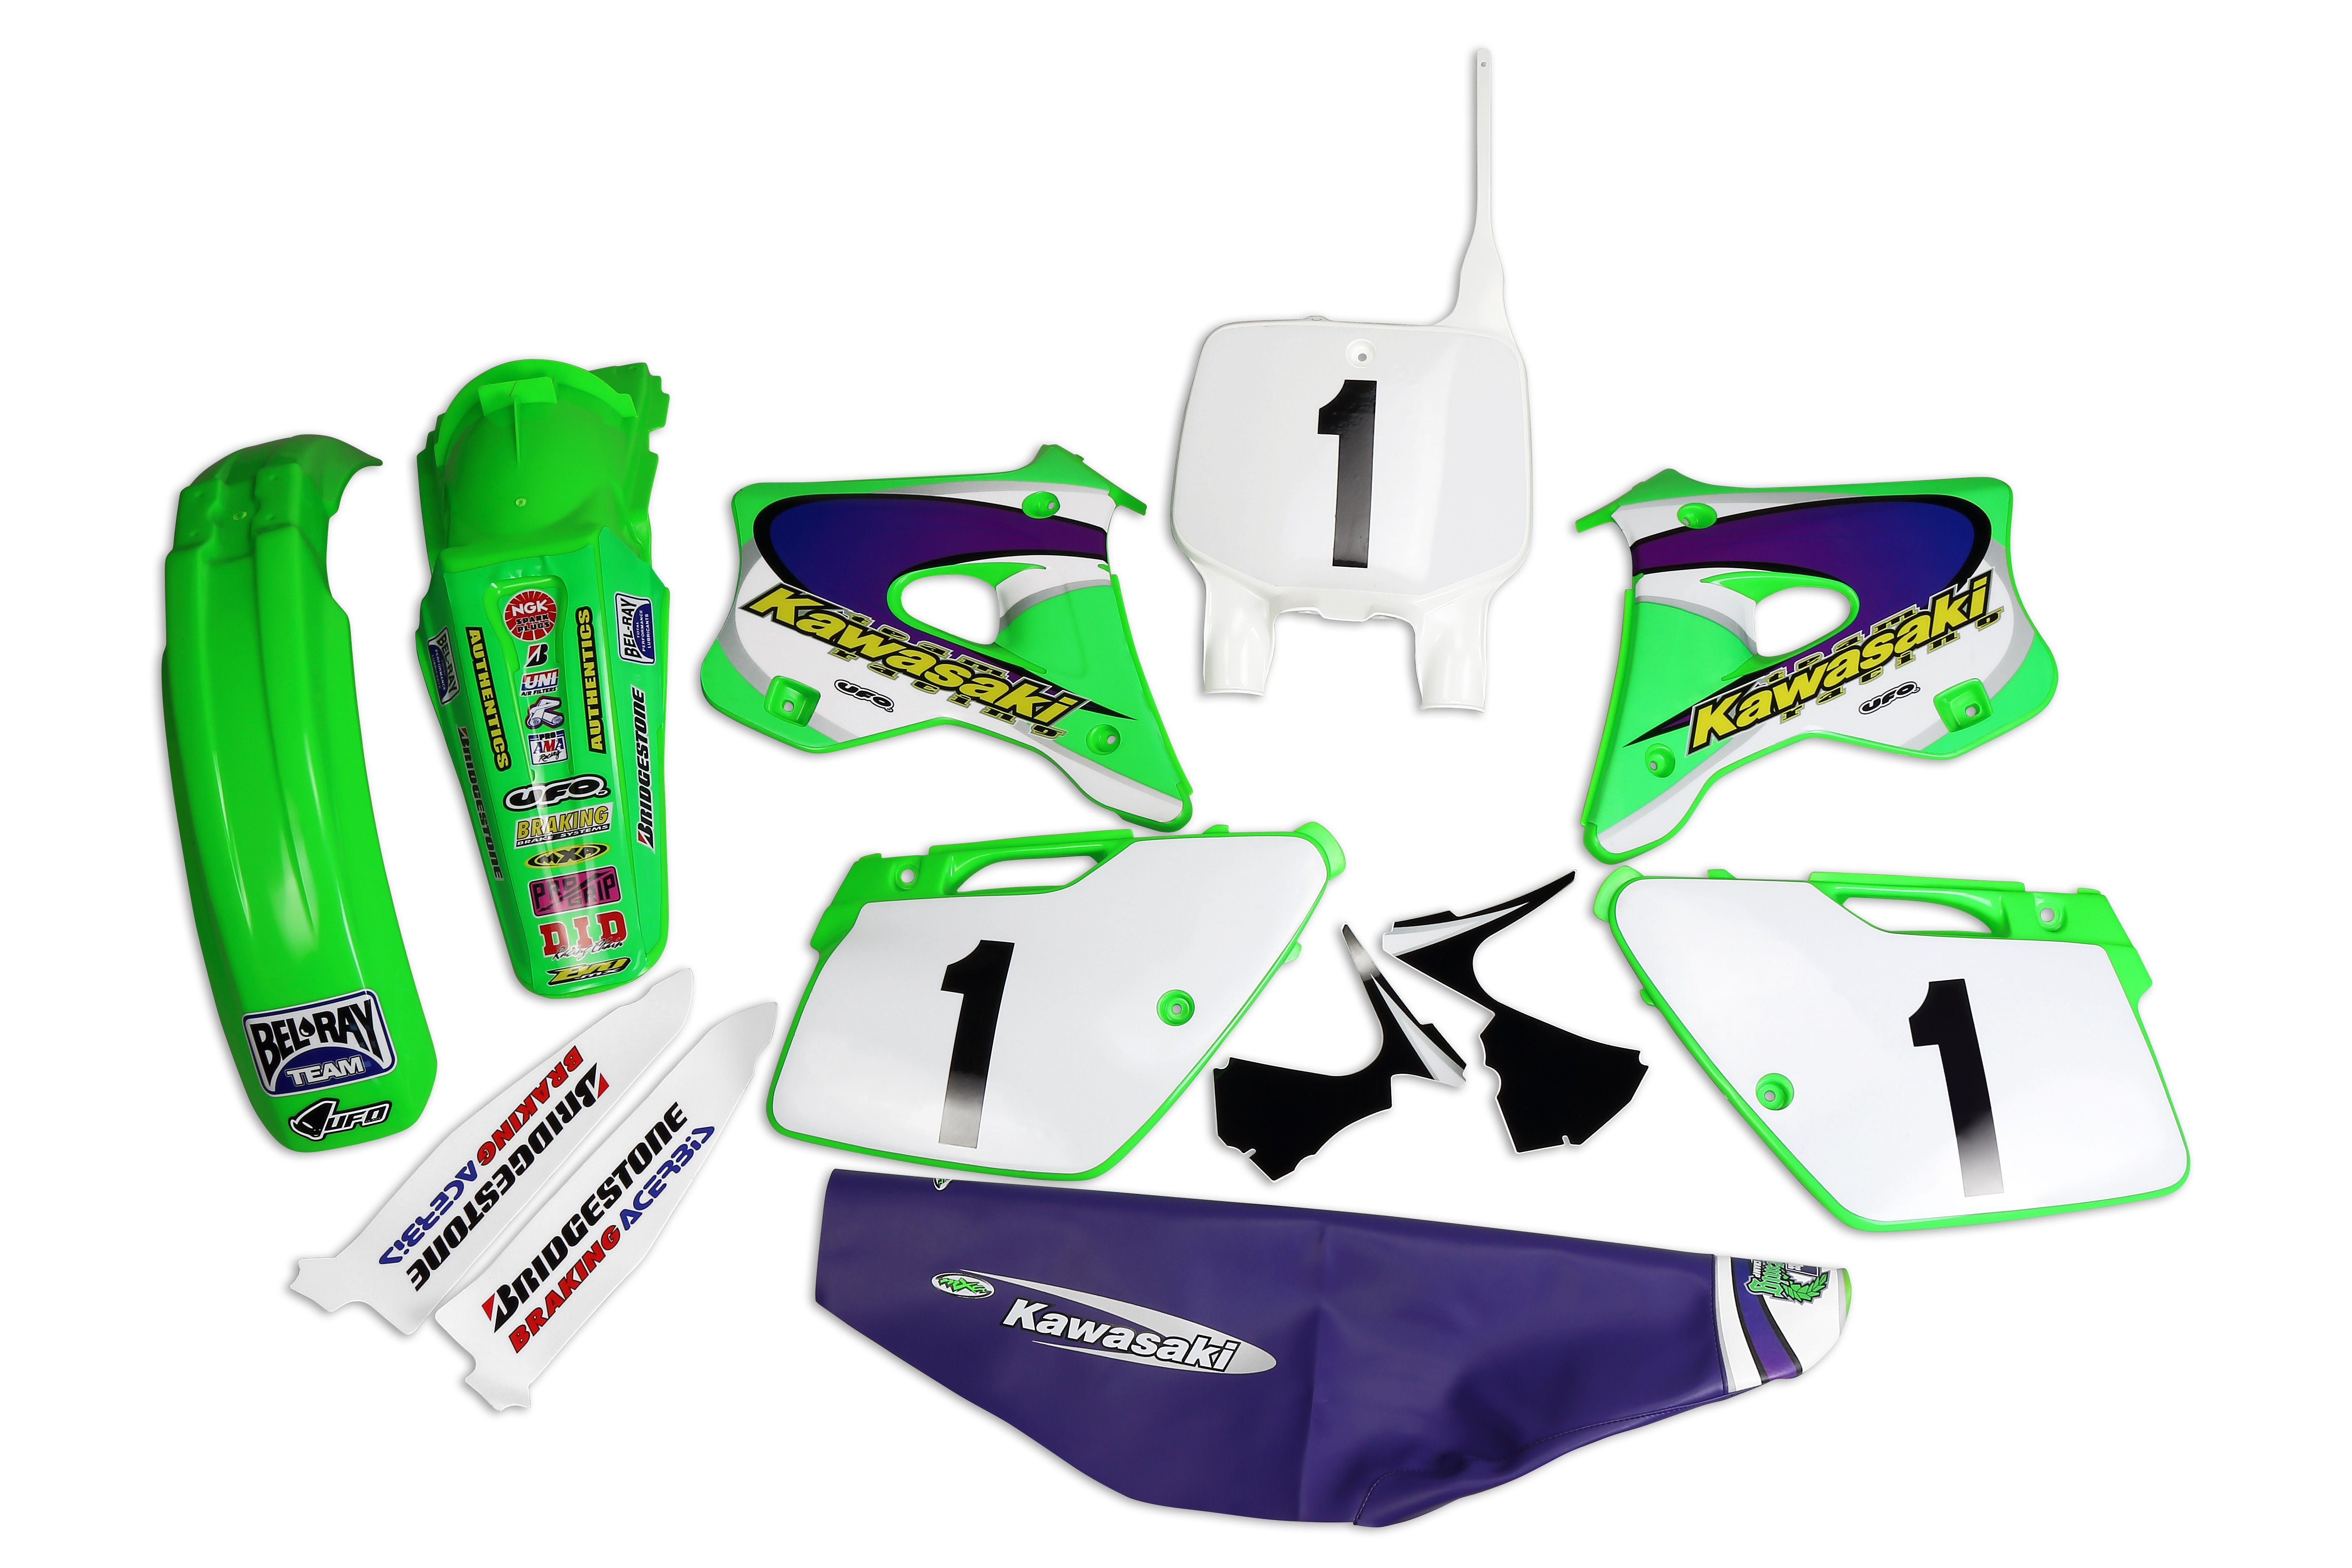 bryder daggry igennem Gnaven UFO Replica KIT Kawasaki KX 125/250 1994-98 Emig Team USA, includes all  Parts in the picture